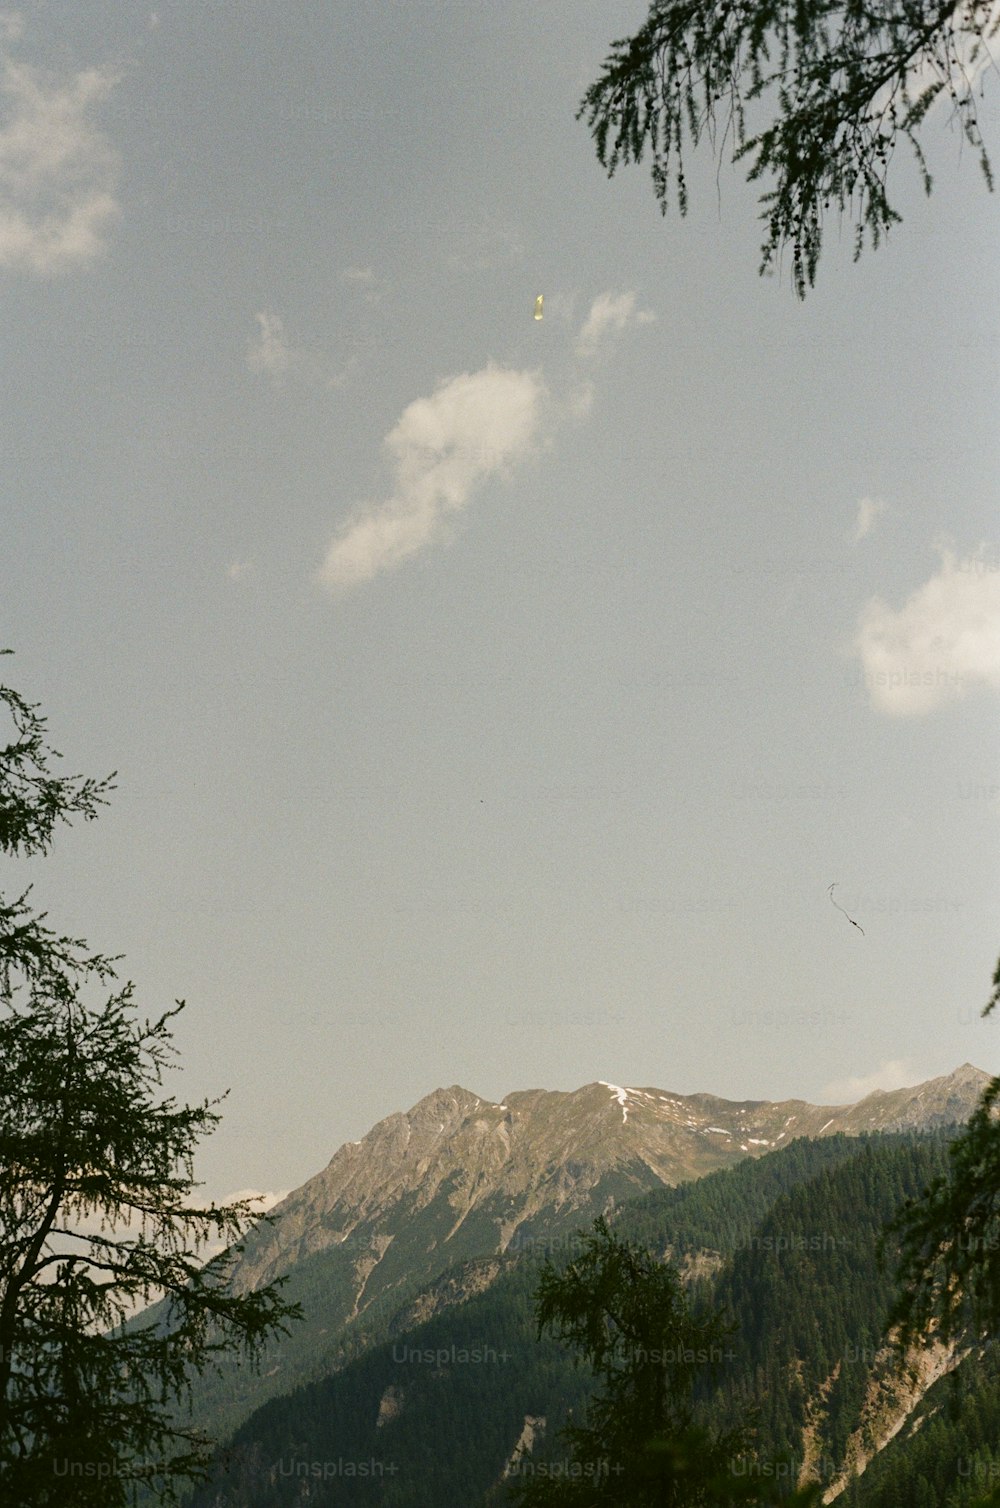 a view of a mountain with a kite flying in the sky